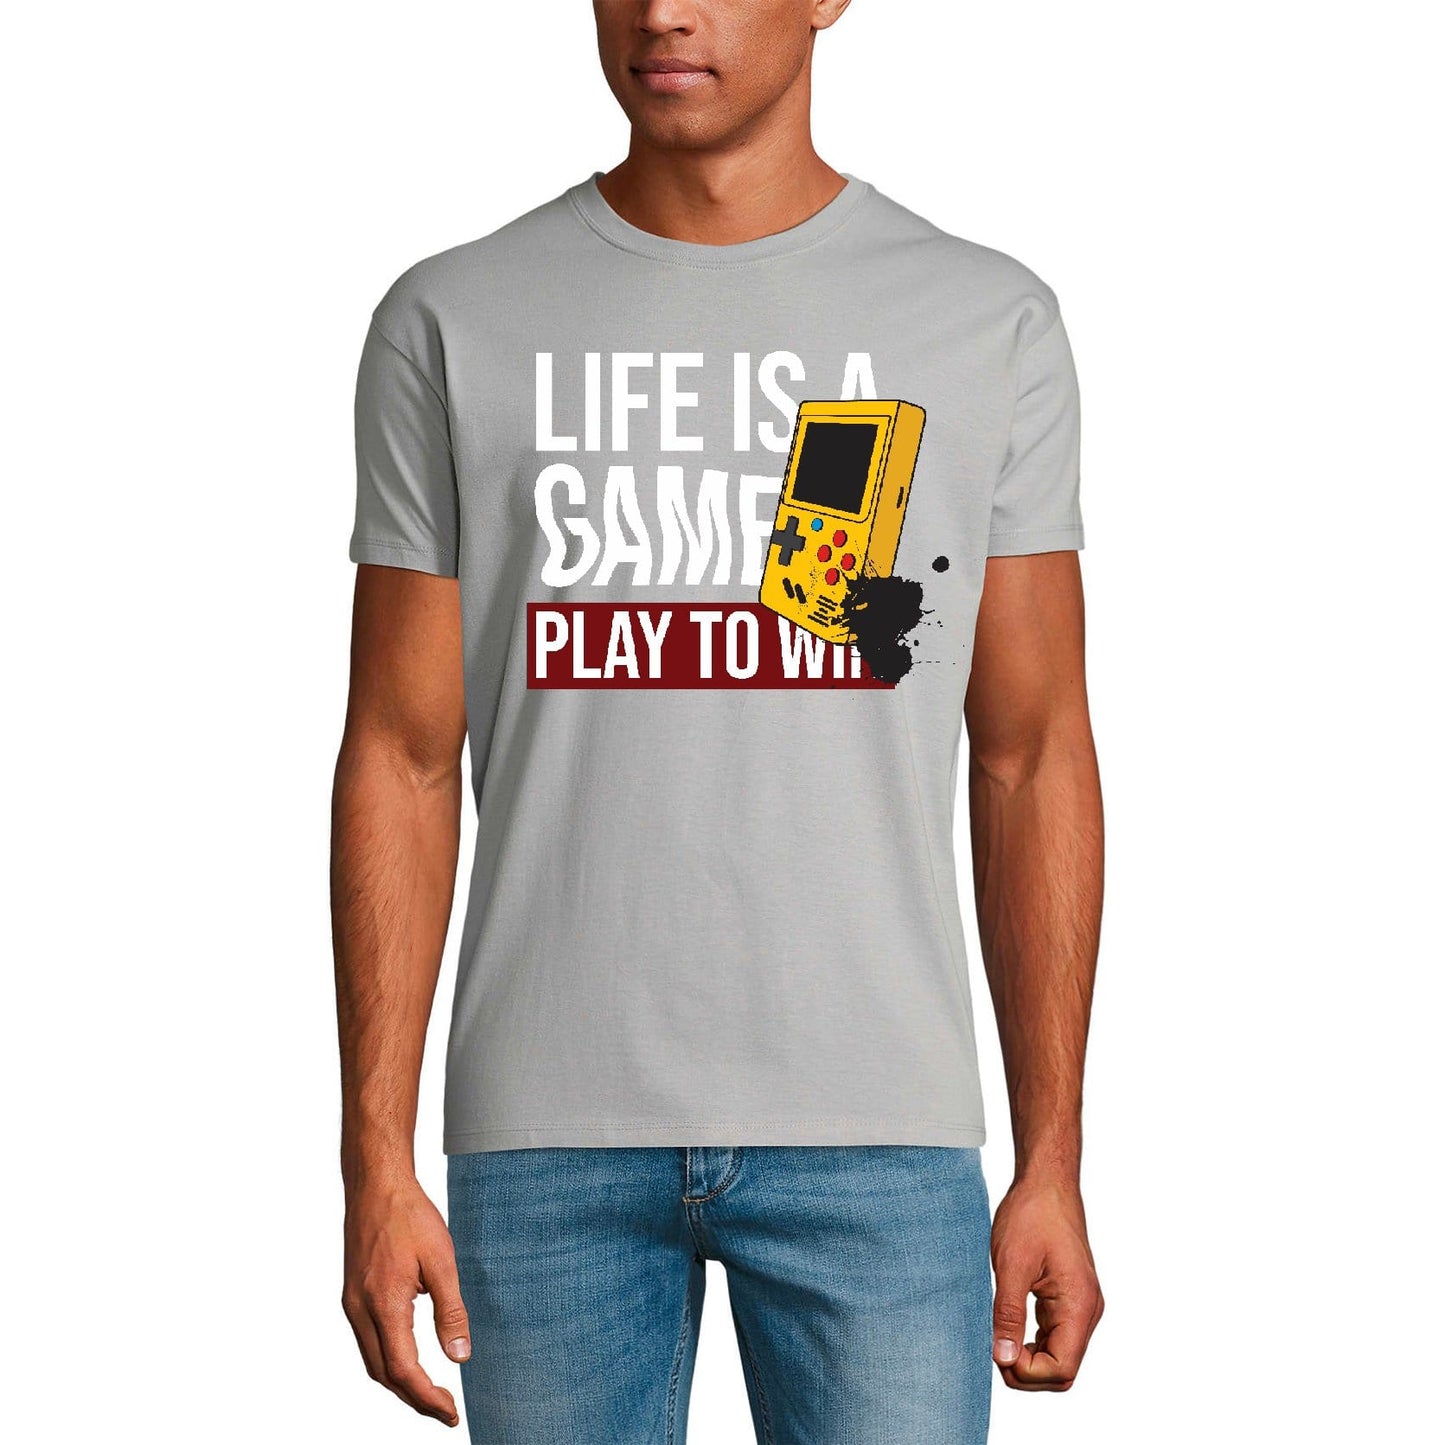 ULTRABASIC Men's Gaming T-Shirt Life is a Game Play to Win - Motivational Gamer Tee Shirt